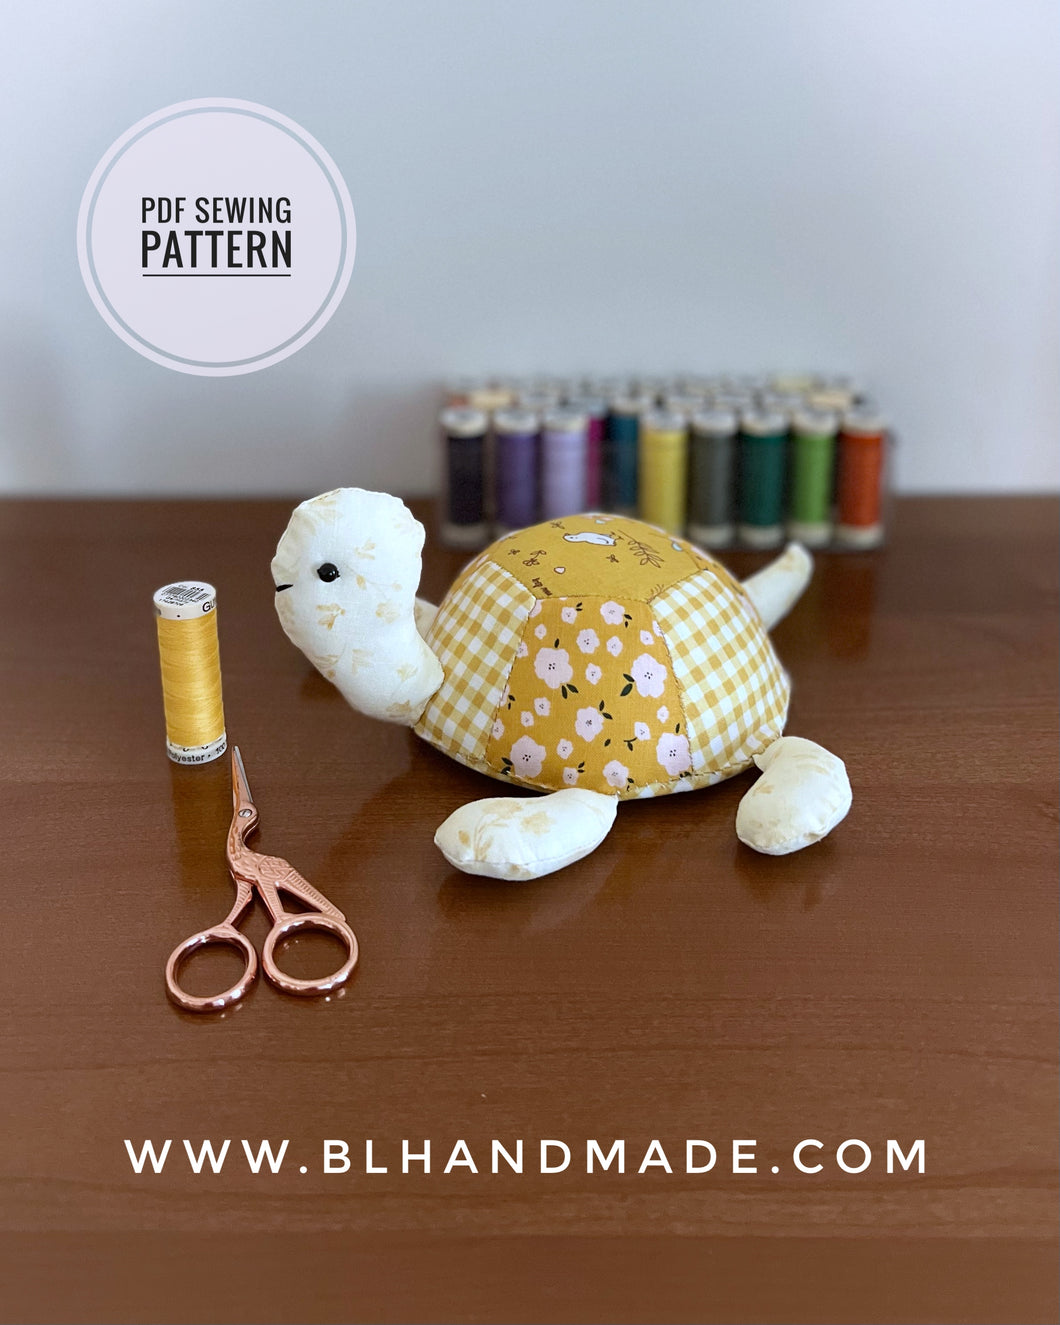 Turtle Patchwork Pincushion Sewing Pattern for instant download